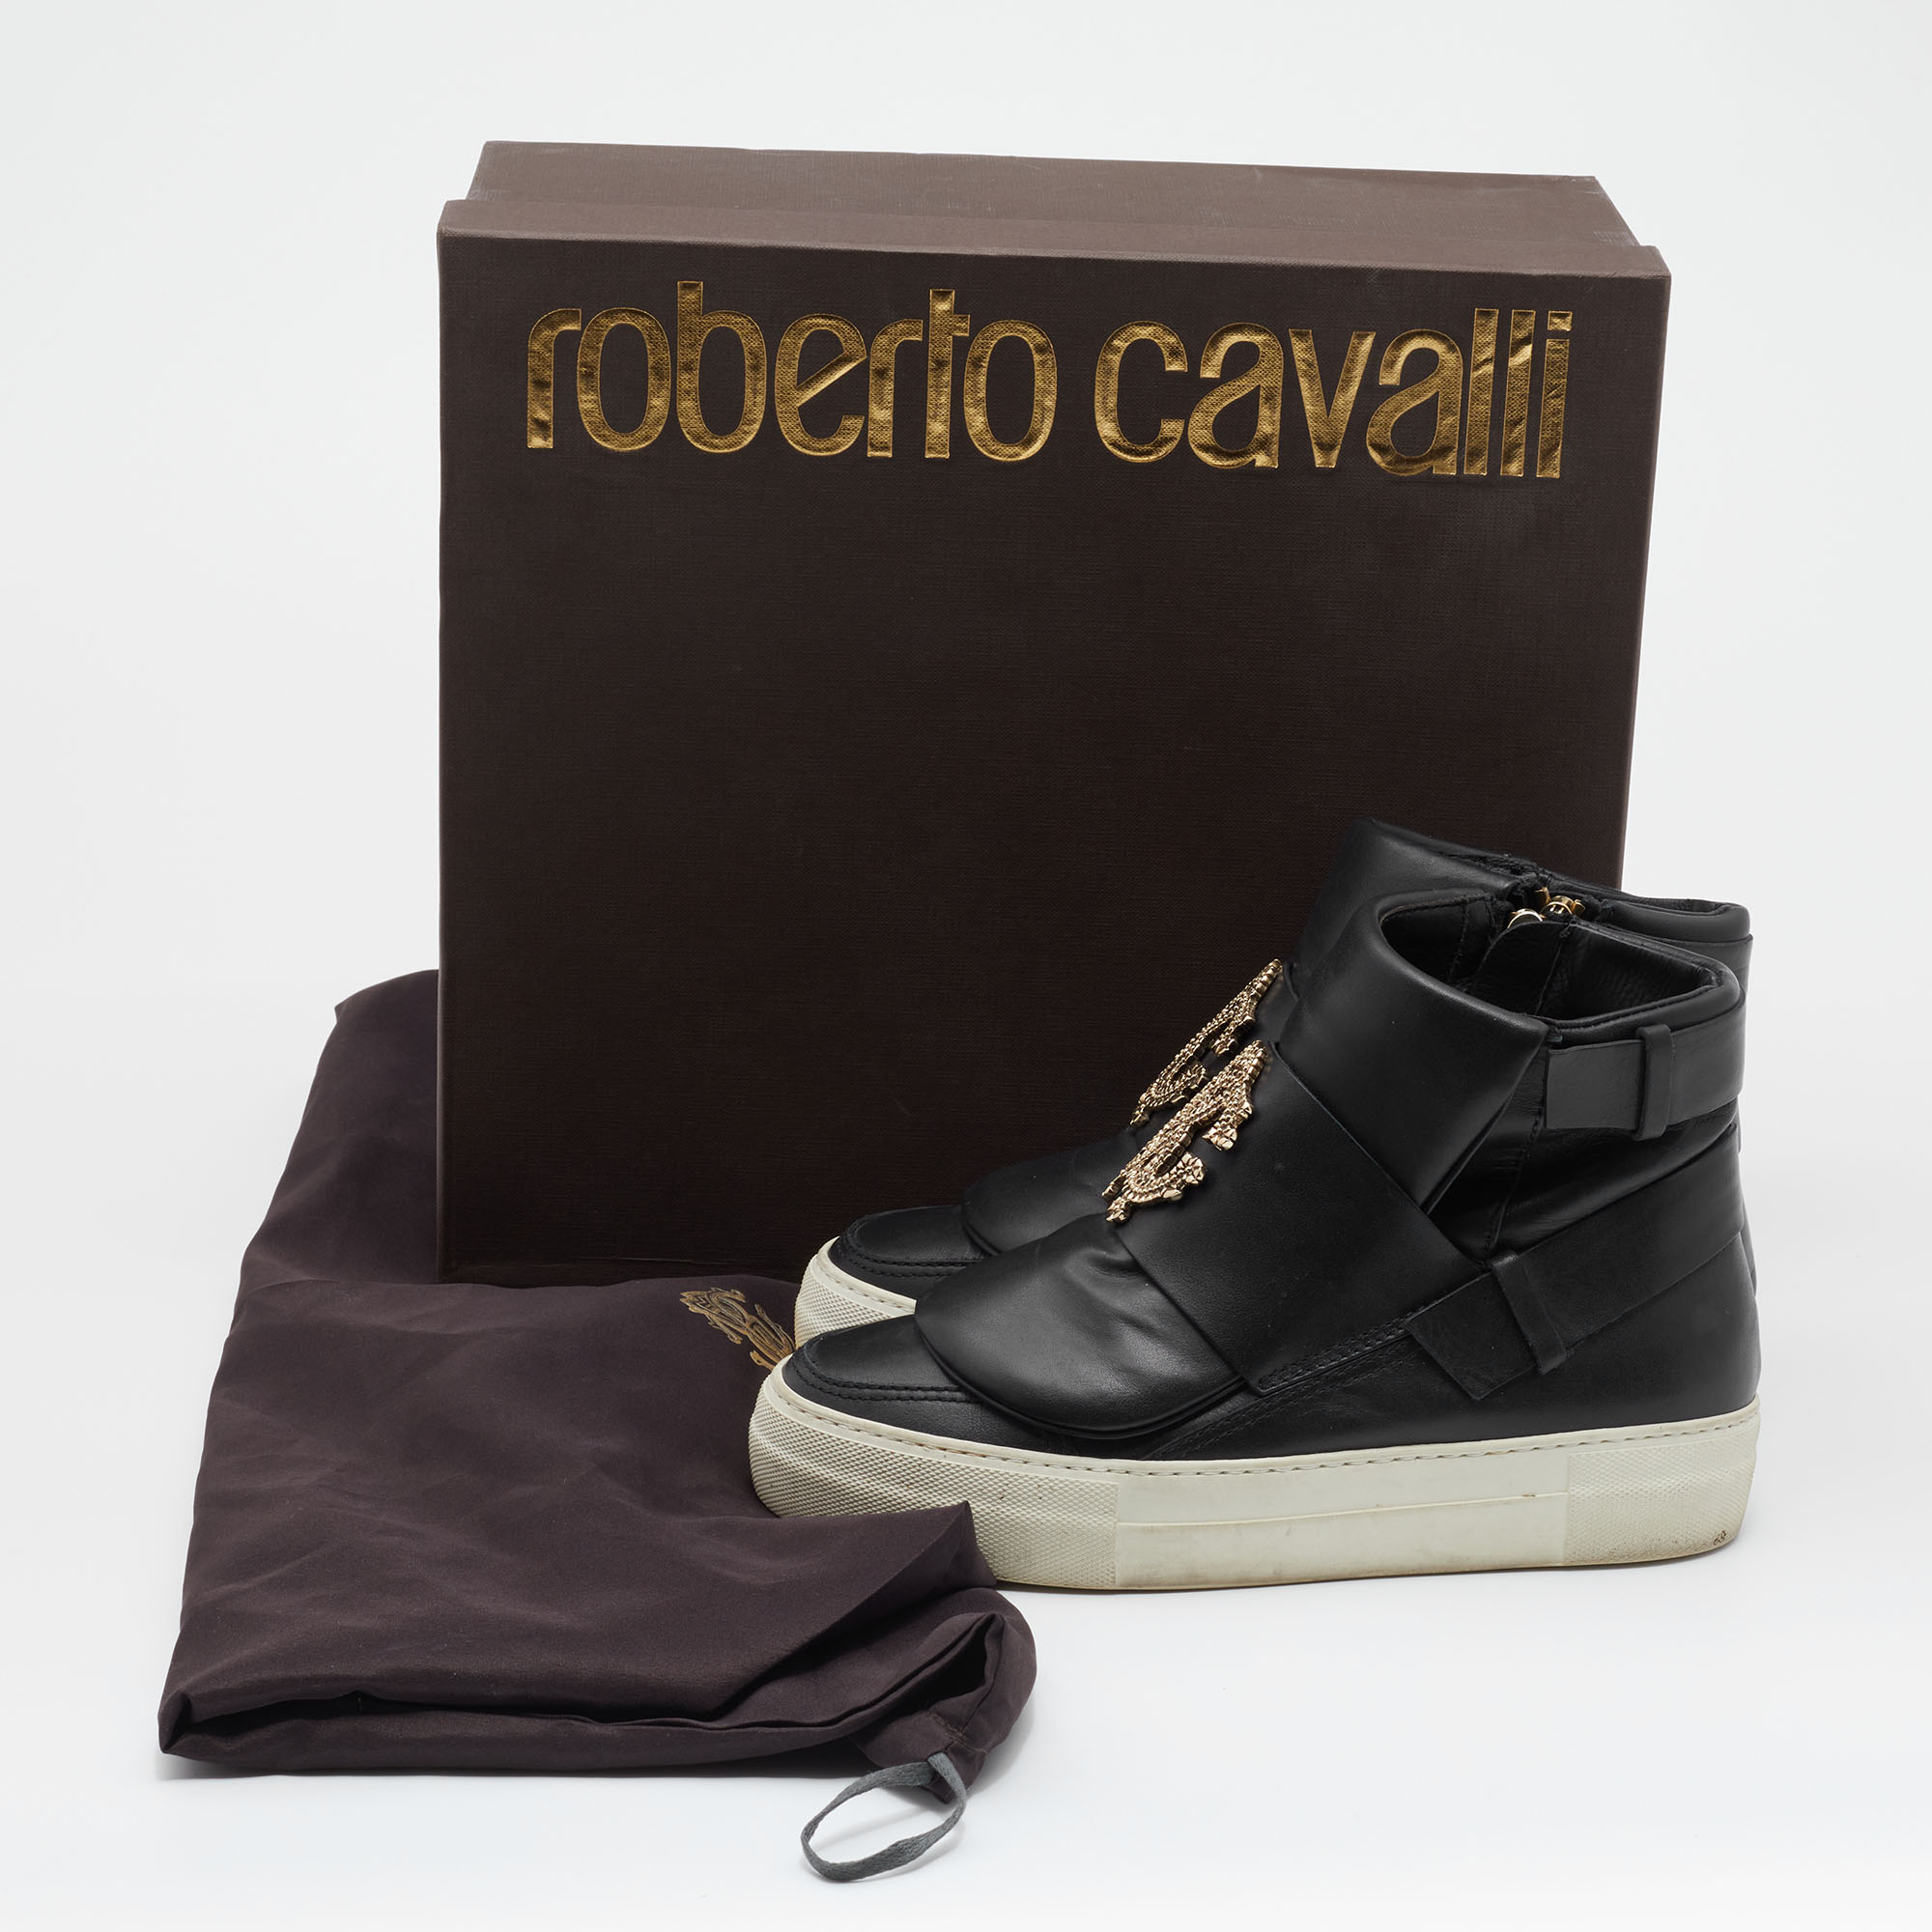 Roberto Cavalli Black Leather High Top Sneakers Size 36